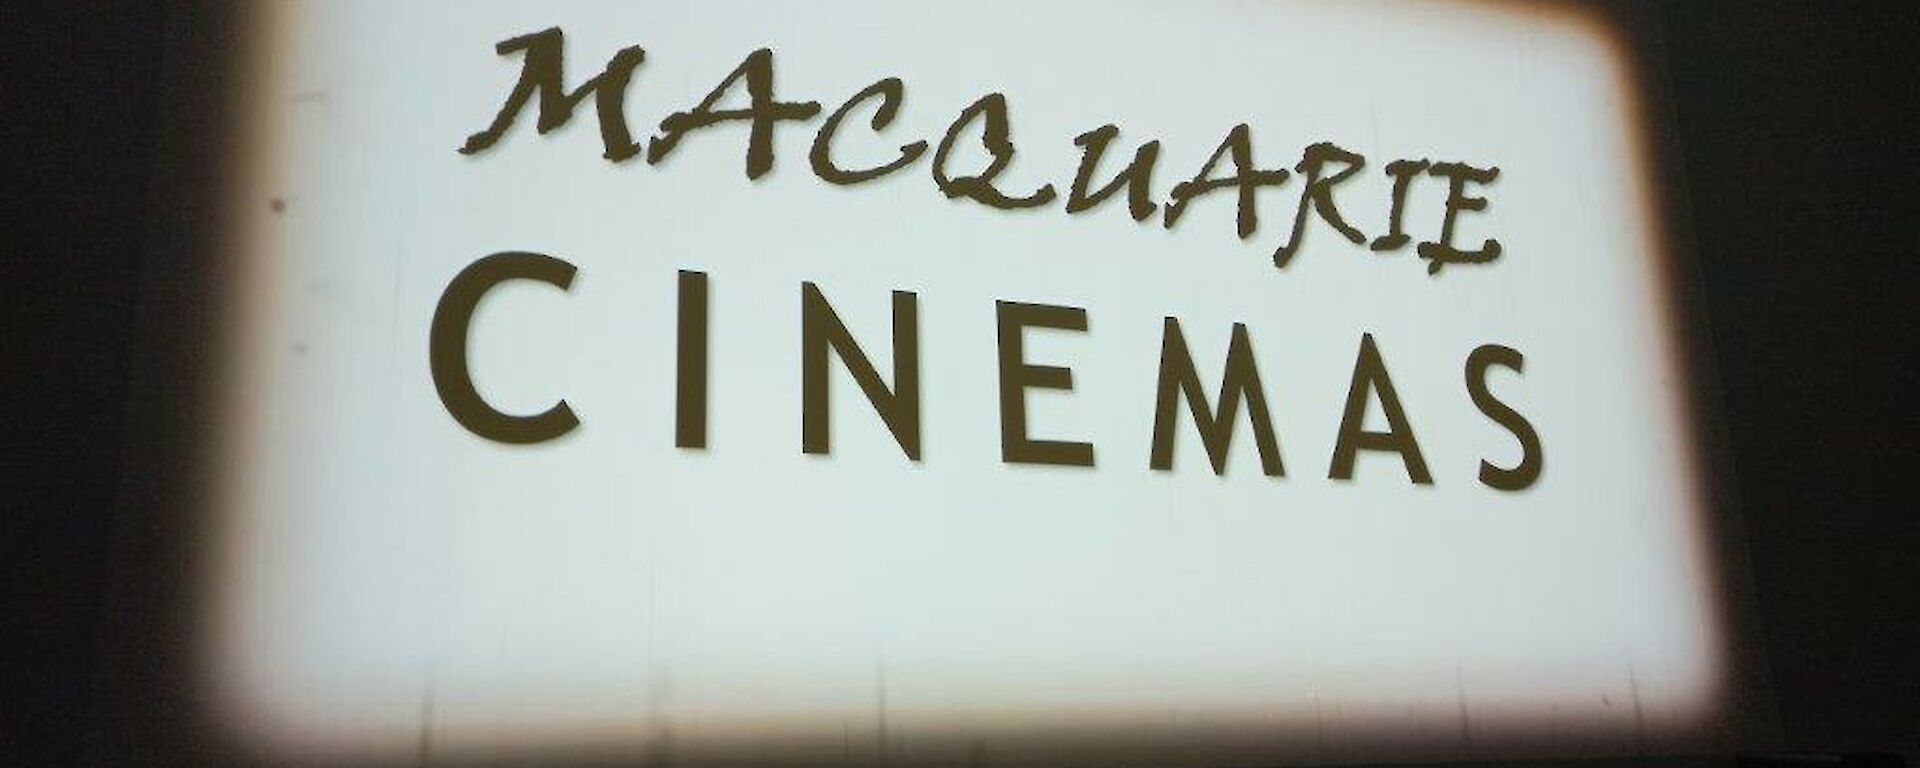 A large white cinema screen with showing a black and white sign saying "Macquarie cinemas"